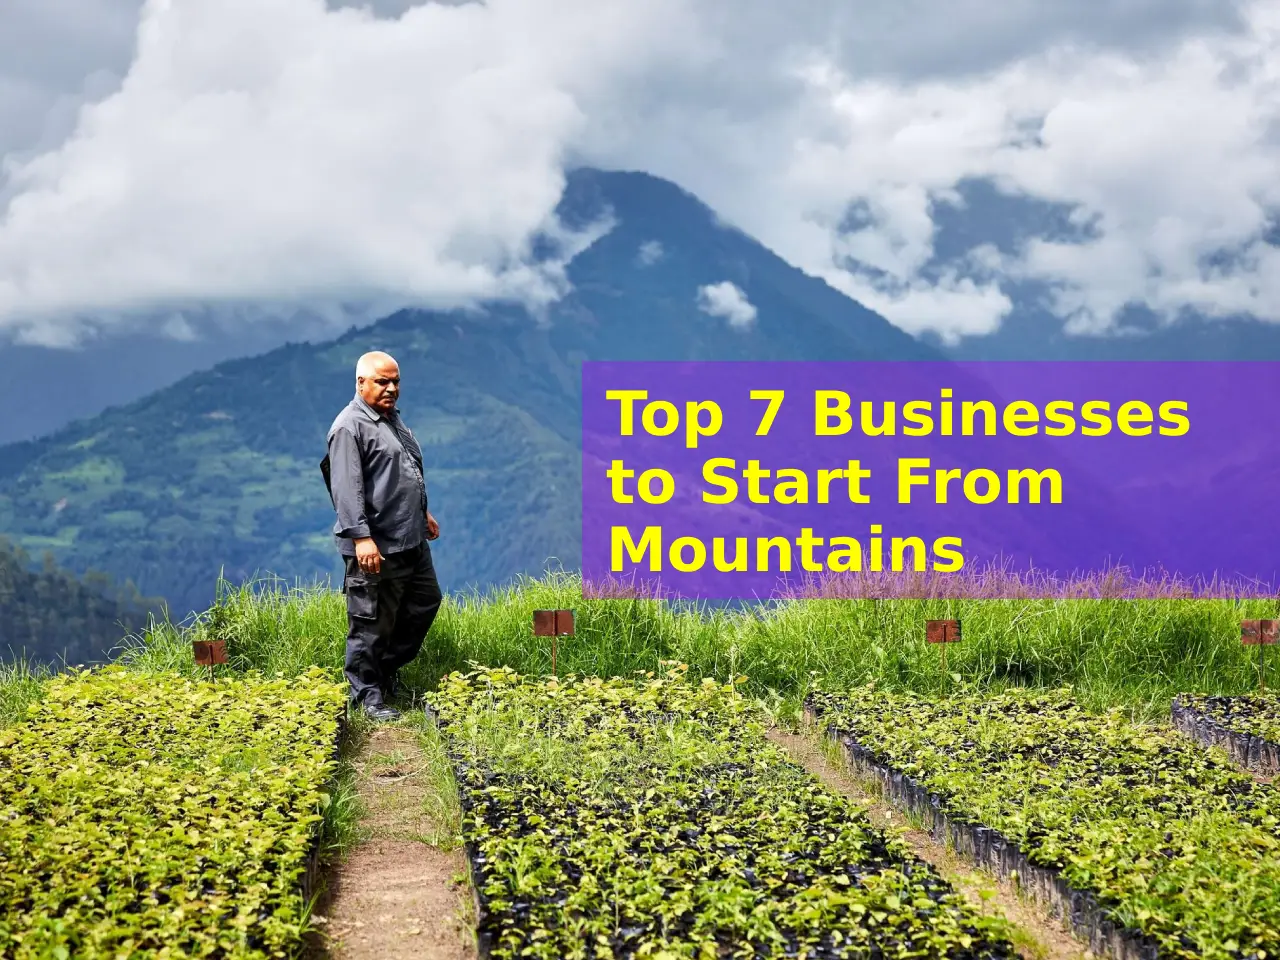 Top 7 Businesses to Start From Mountains In India